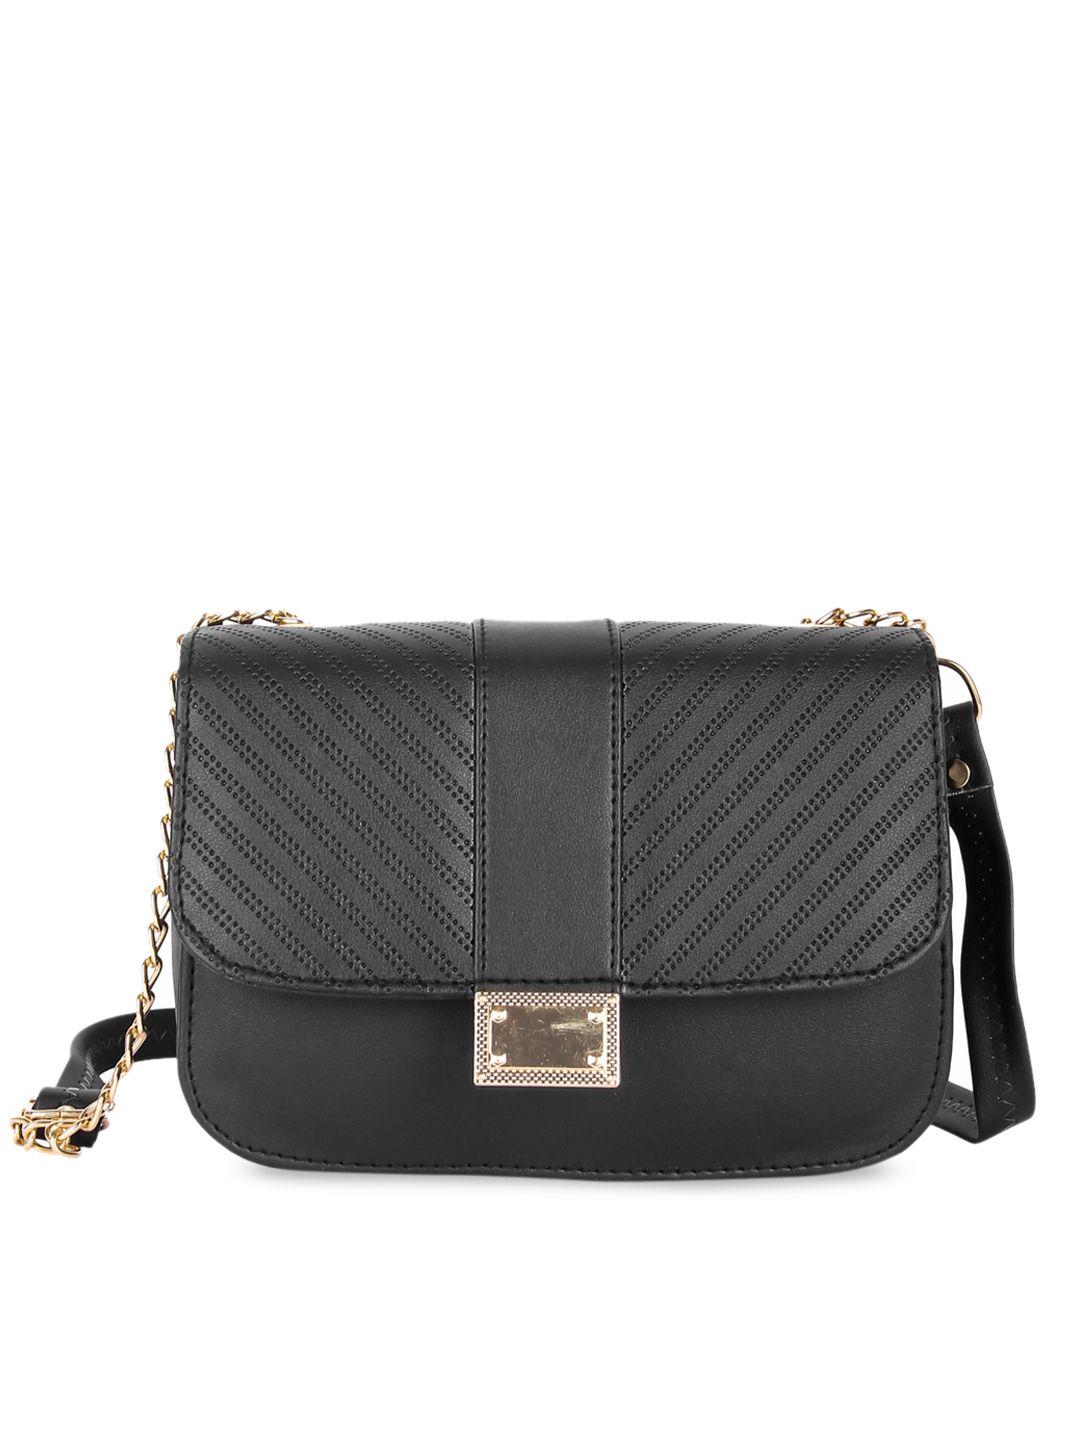 leather retail black textured pu structured sling bag with quilted